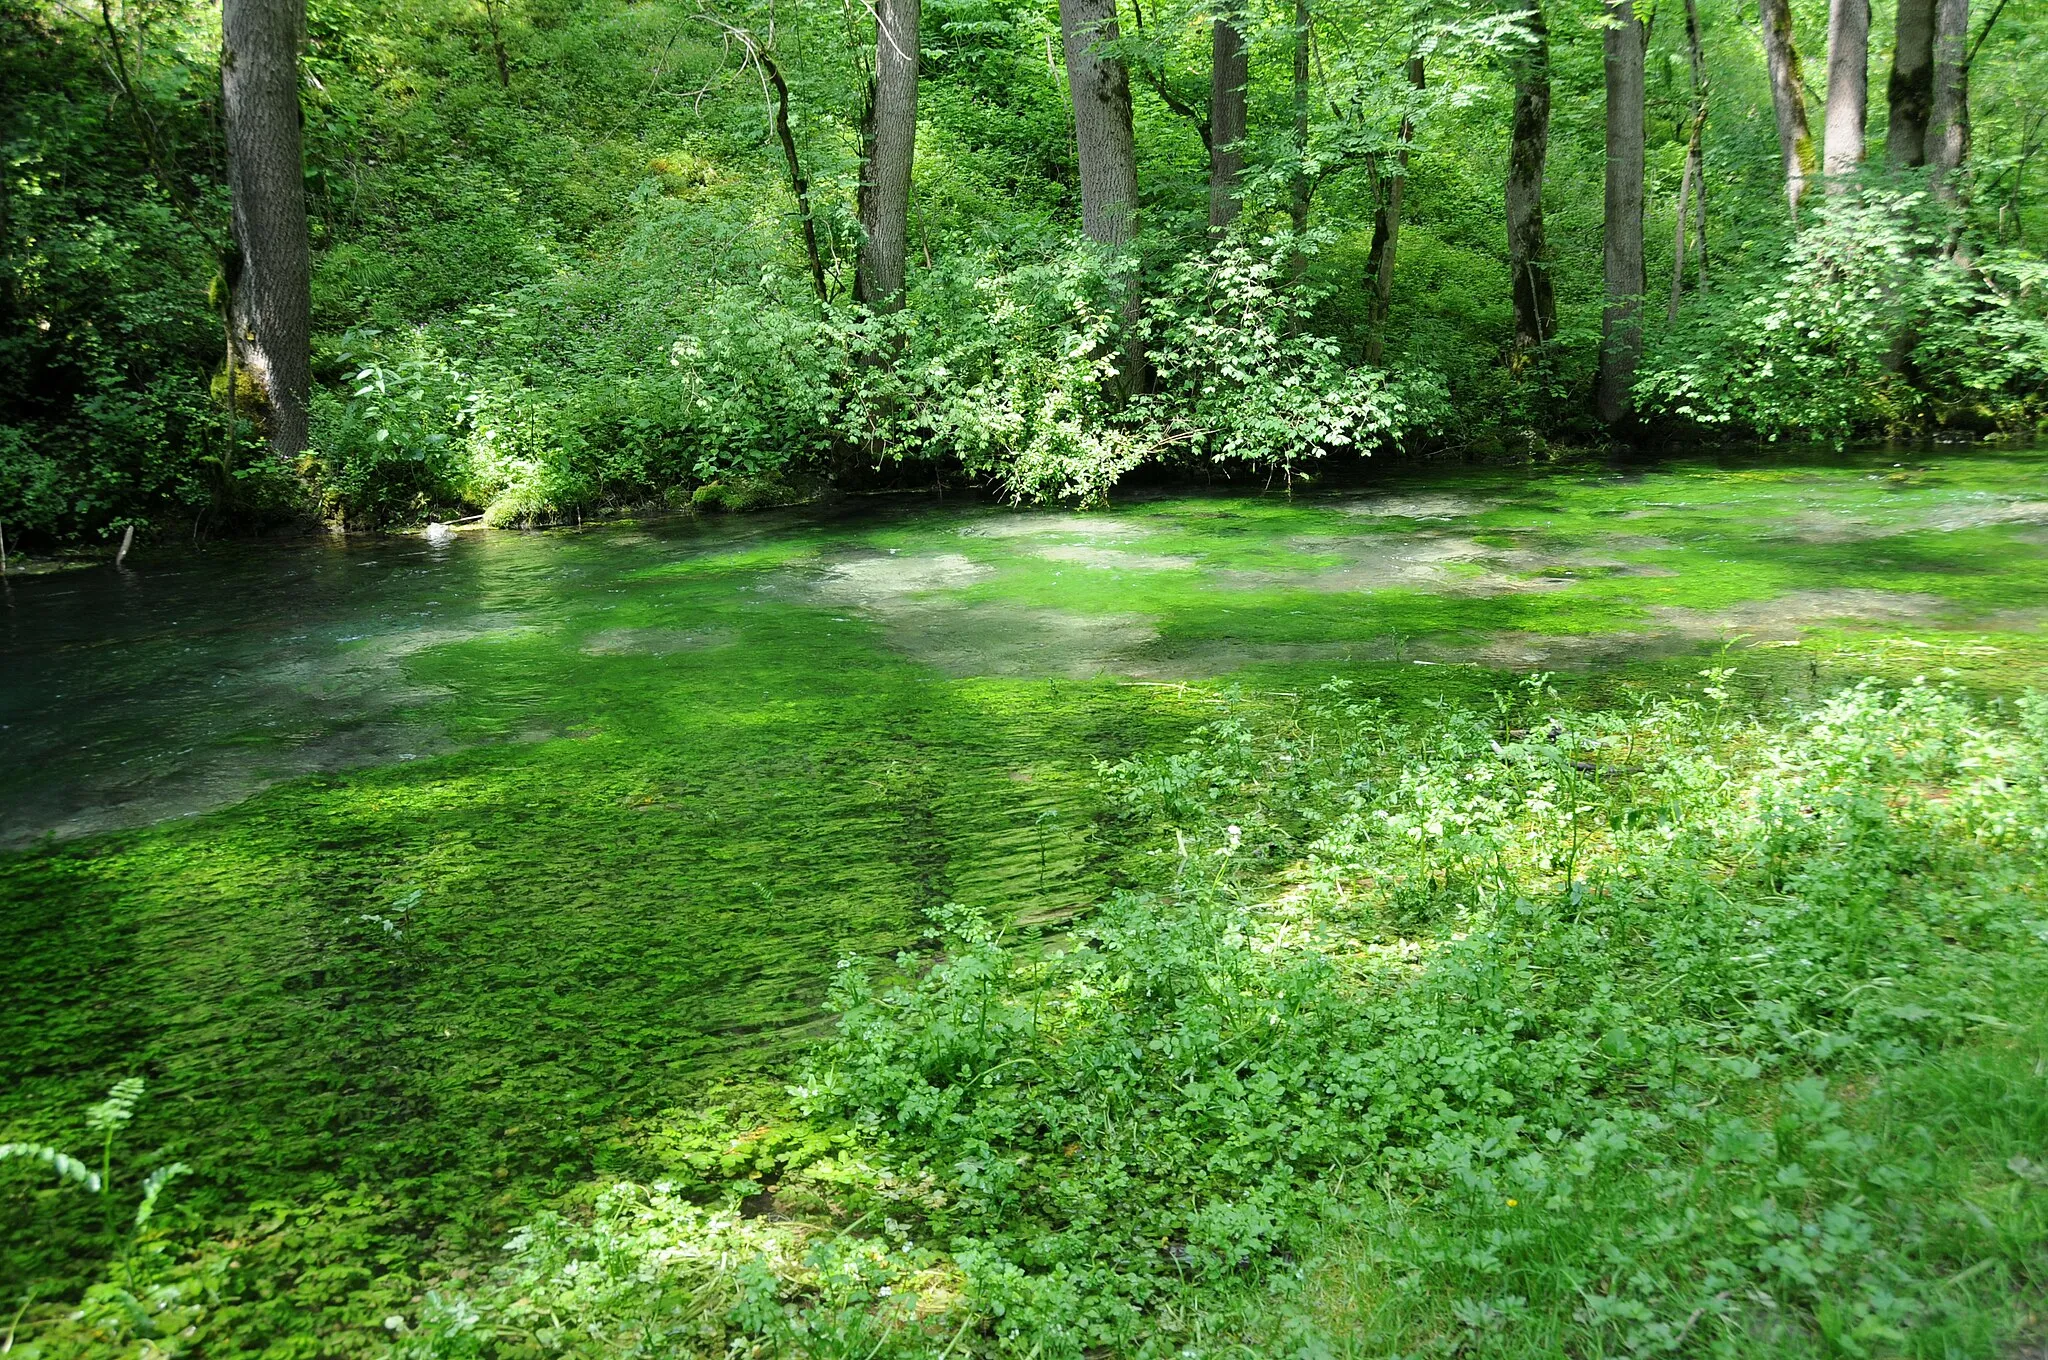 Photo showing: The little river "Zwiefalter Ach" at the Swabian alb, Germany